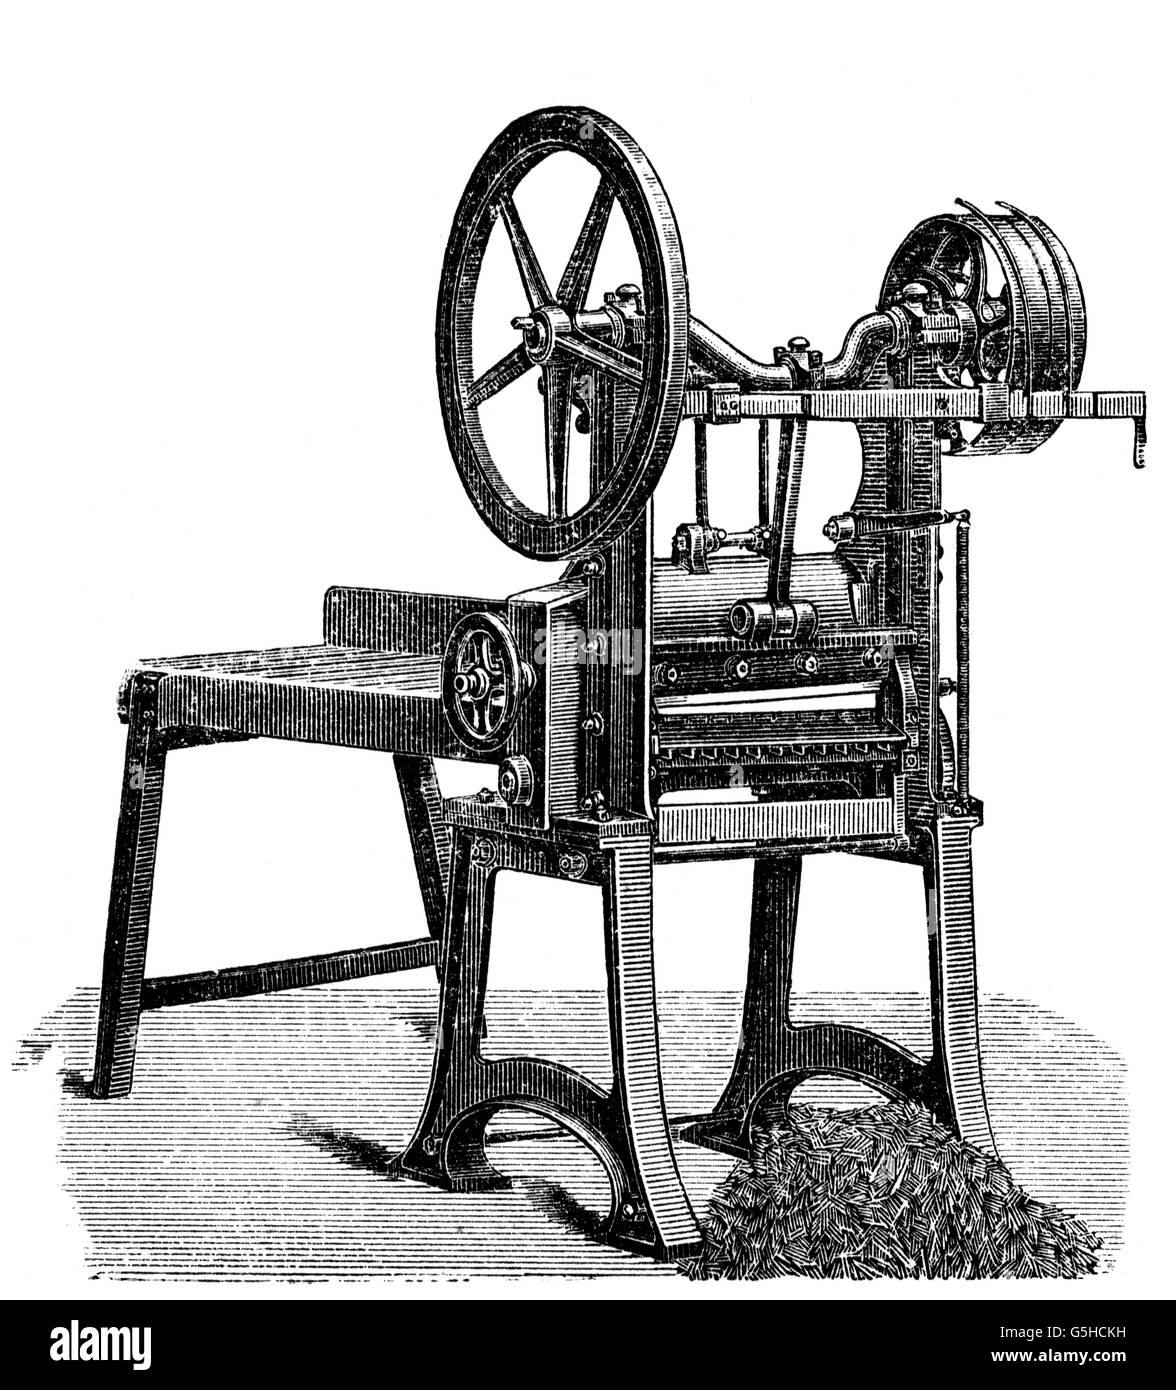 industry, matches, machine, husker, matchstick chipping machine, after 1850, Additional-Rights-Clearences-Not Available Stock Photo